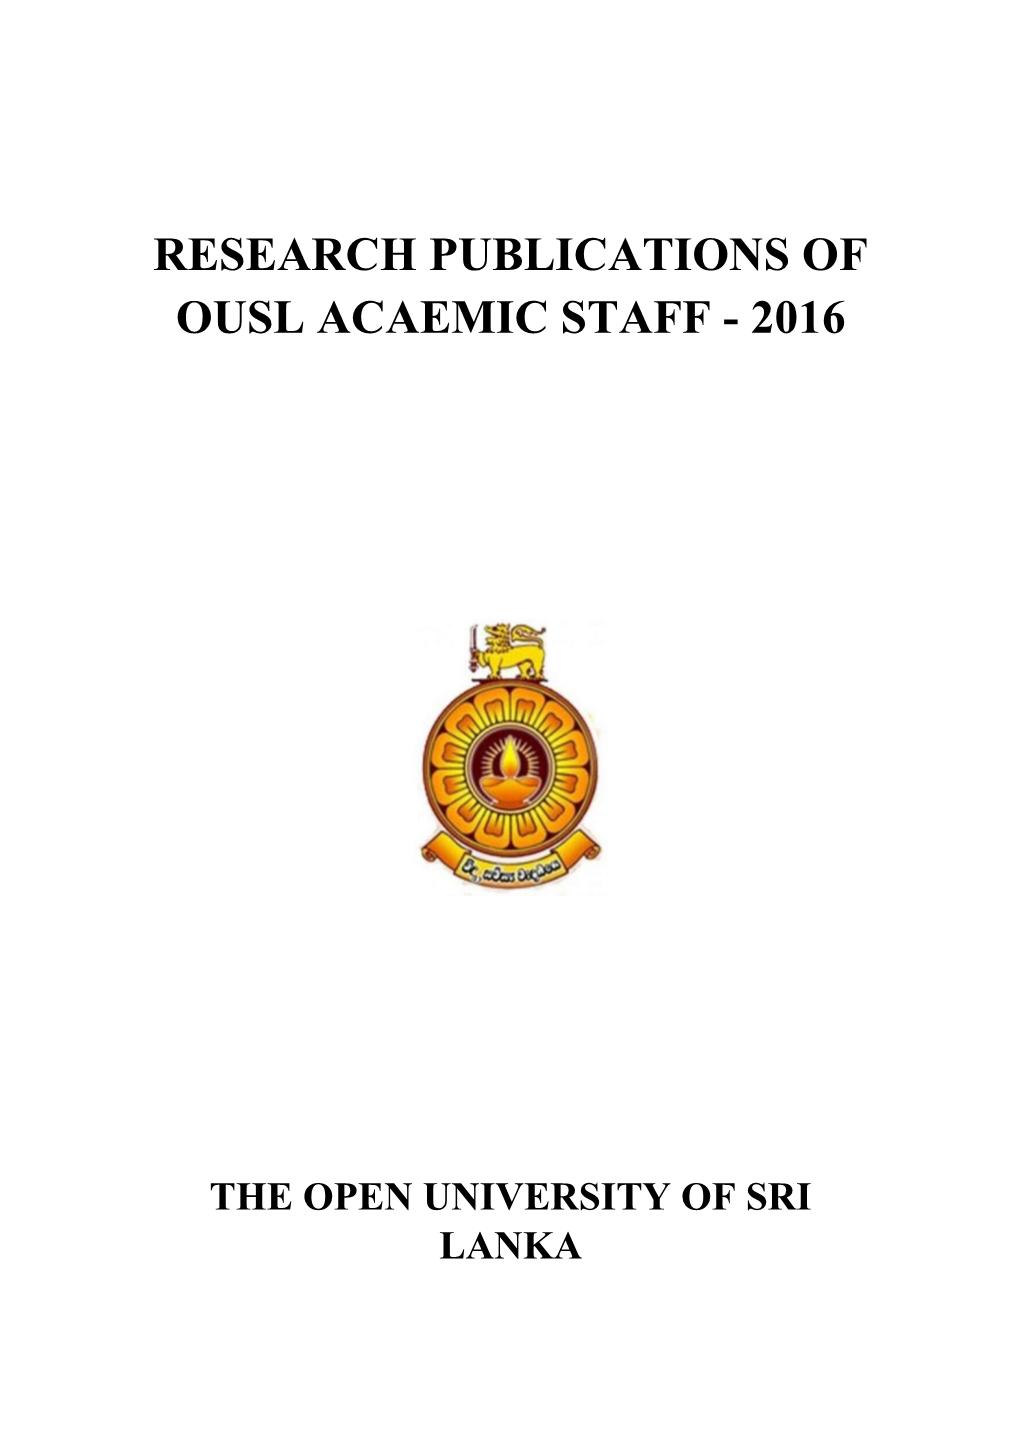 Research Publications of Ousl Acaemic Staff - 2016